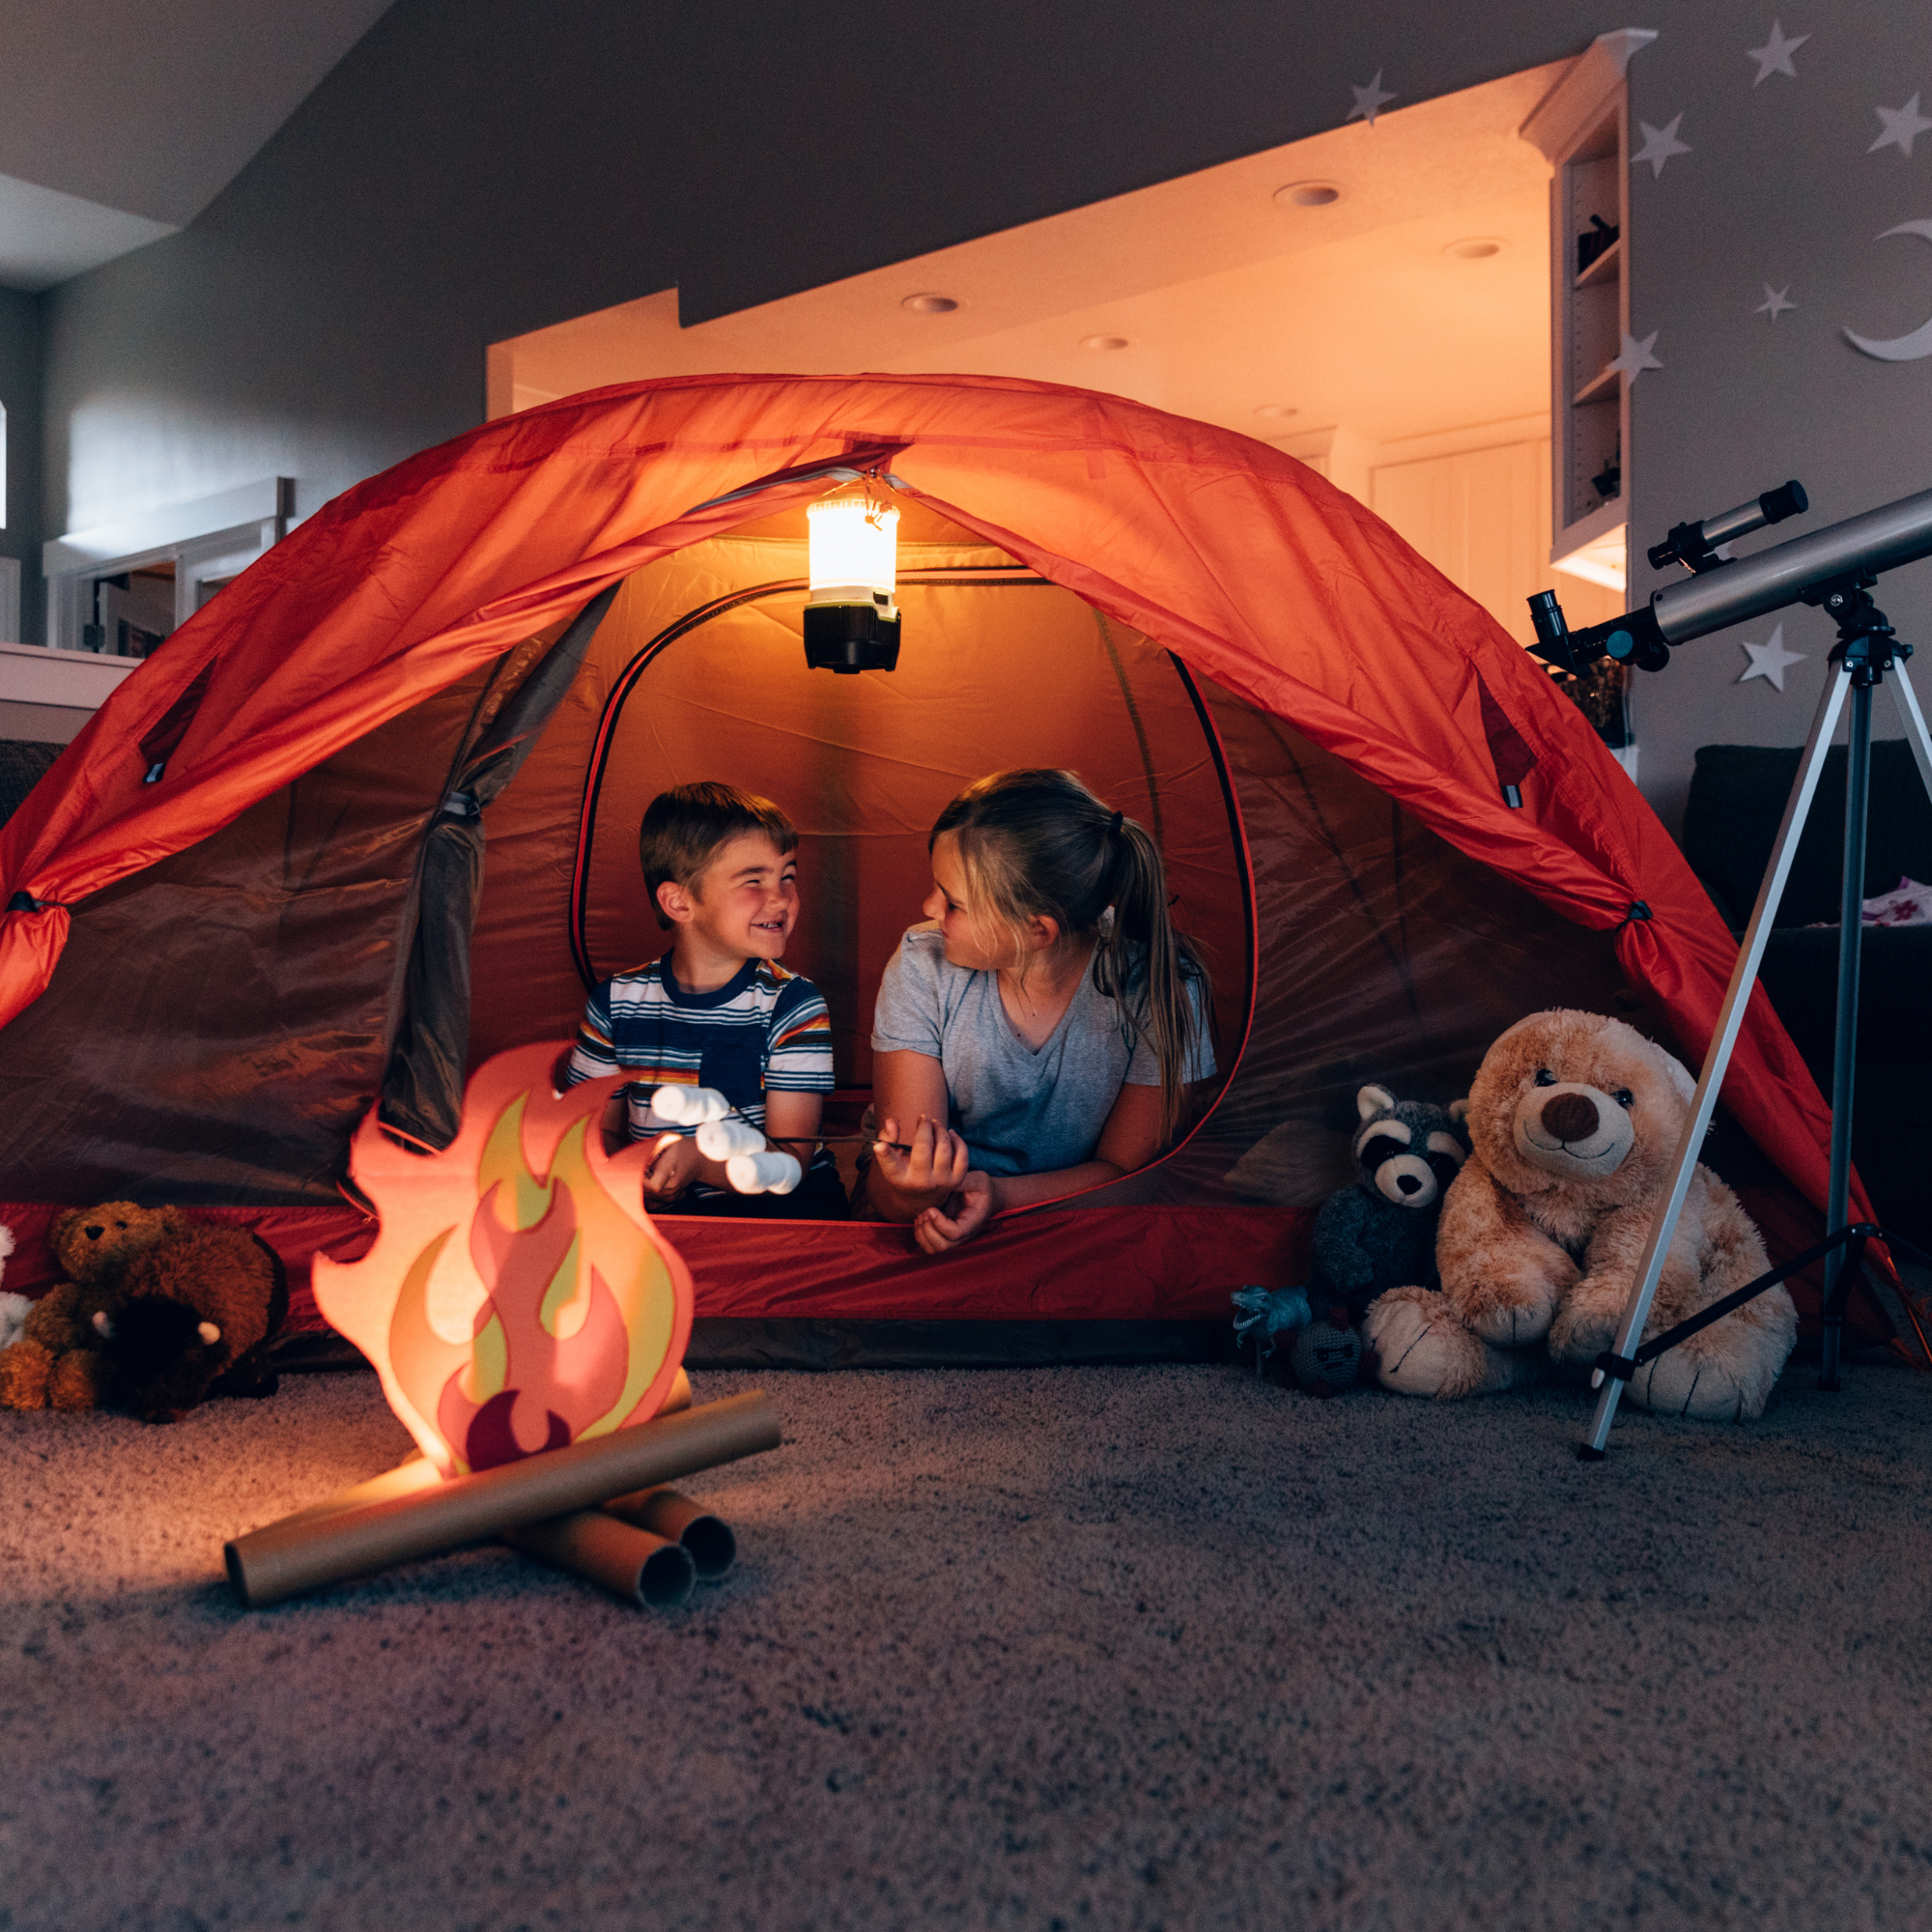 Children playing indoors in a DIY blanket fort with crafted camp fire | Family time - Clair de Lune UK